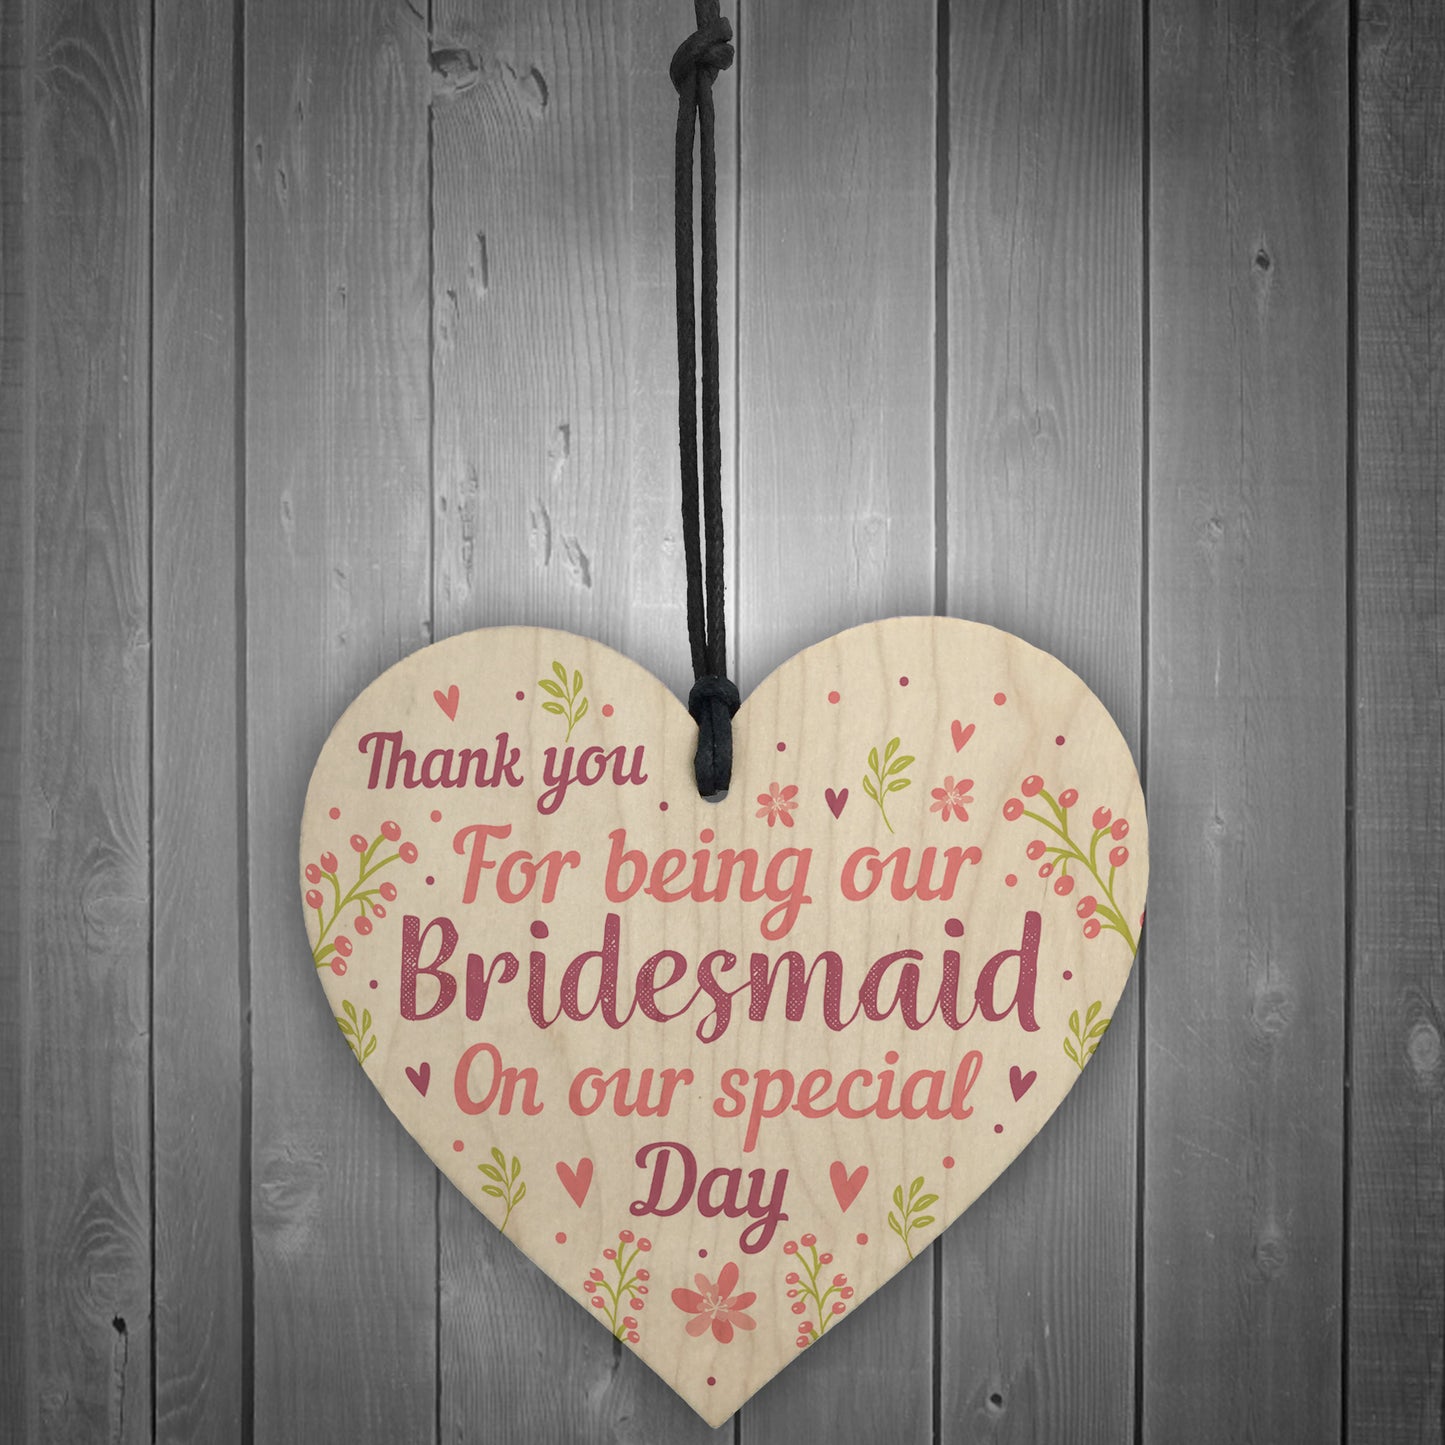 Thank You Wedding Gift Bridesmaid Gifts From Bride Groom